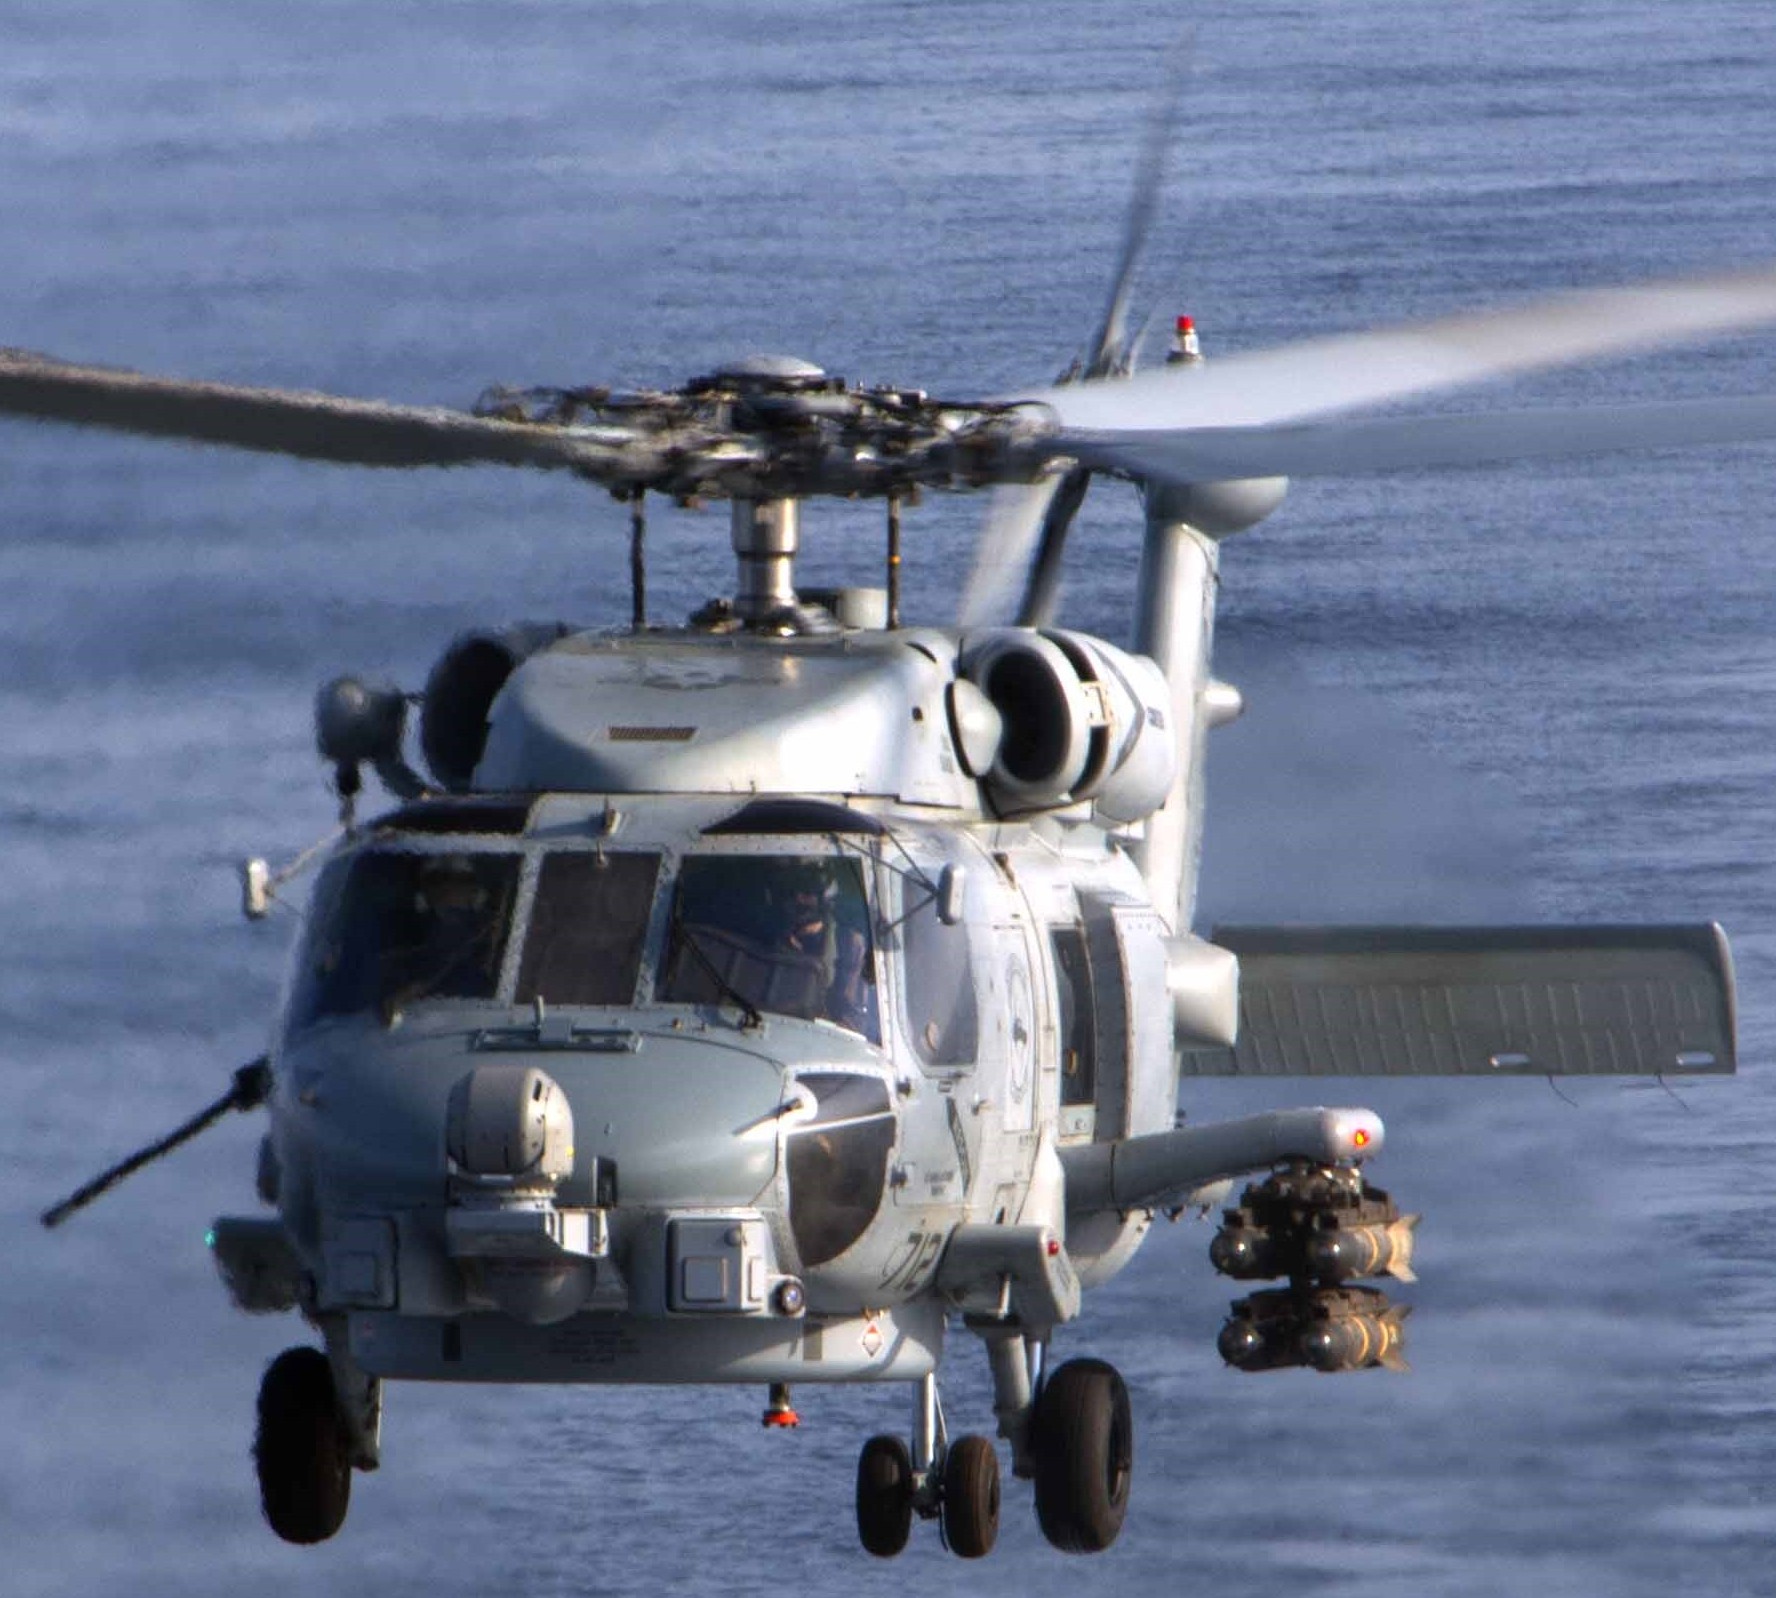 hsm-74 swamp foxes helicopter maritime strike squadron mh-60r seahawk ddg-87 uss mason 09